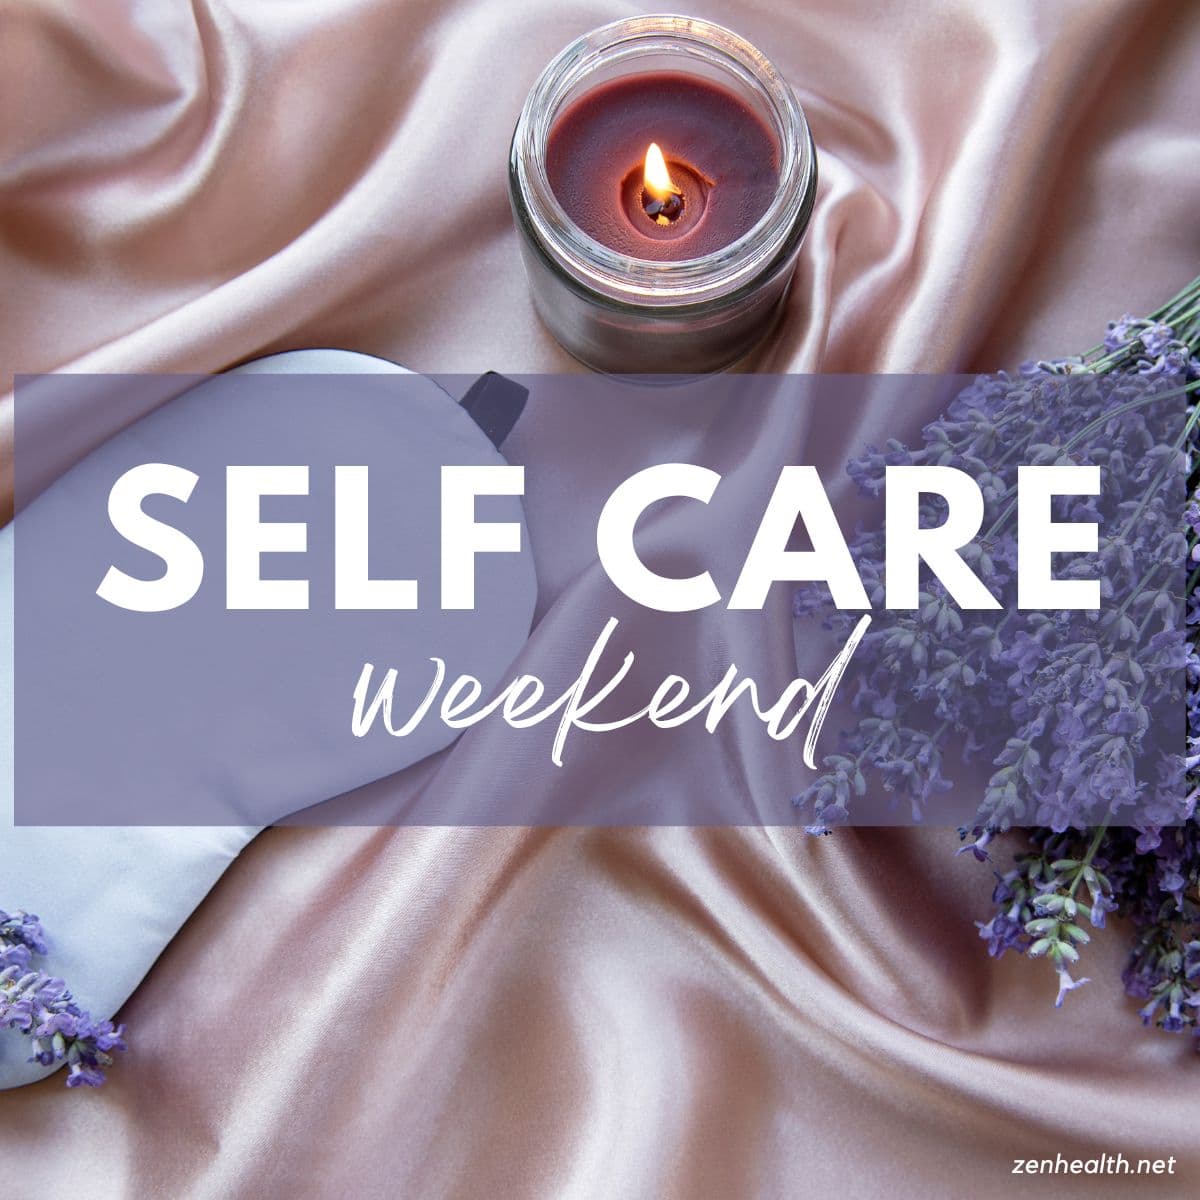 self care weekend text overlay on a photo of a candle, bunch of lavender and a sleeping mask on light pink satin fabric